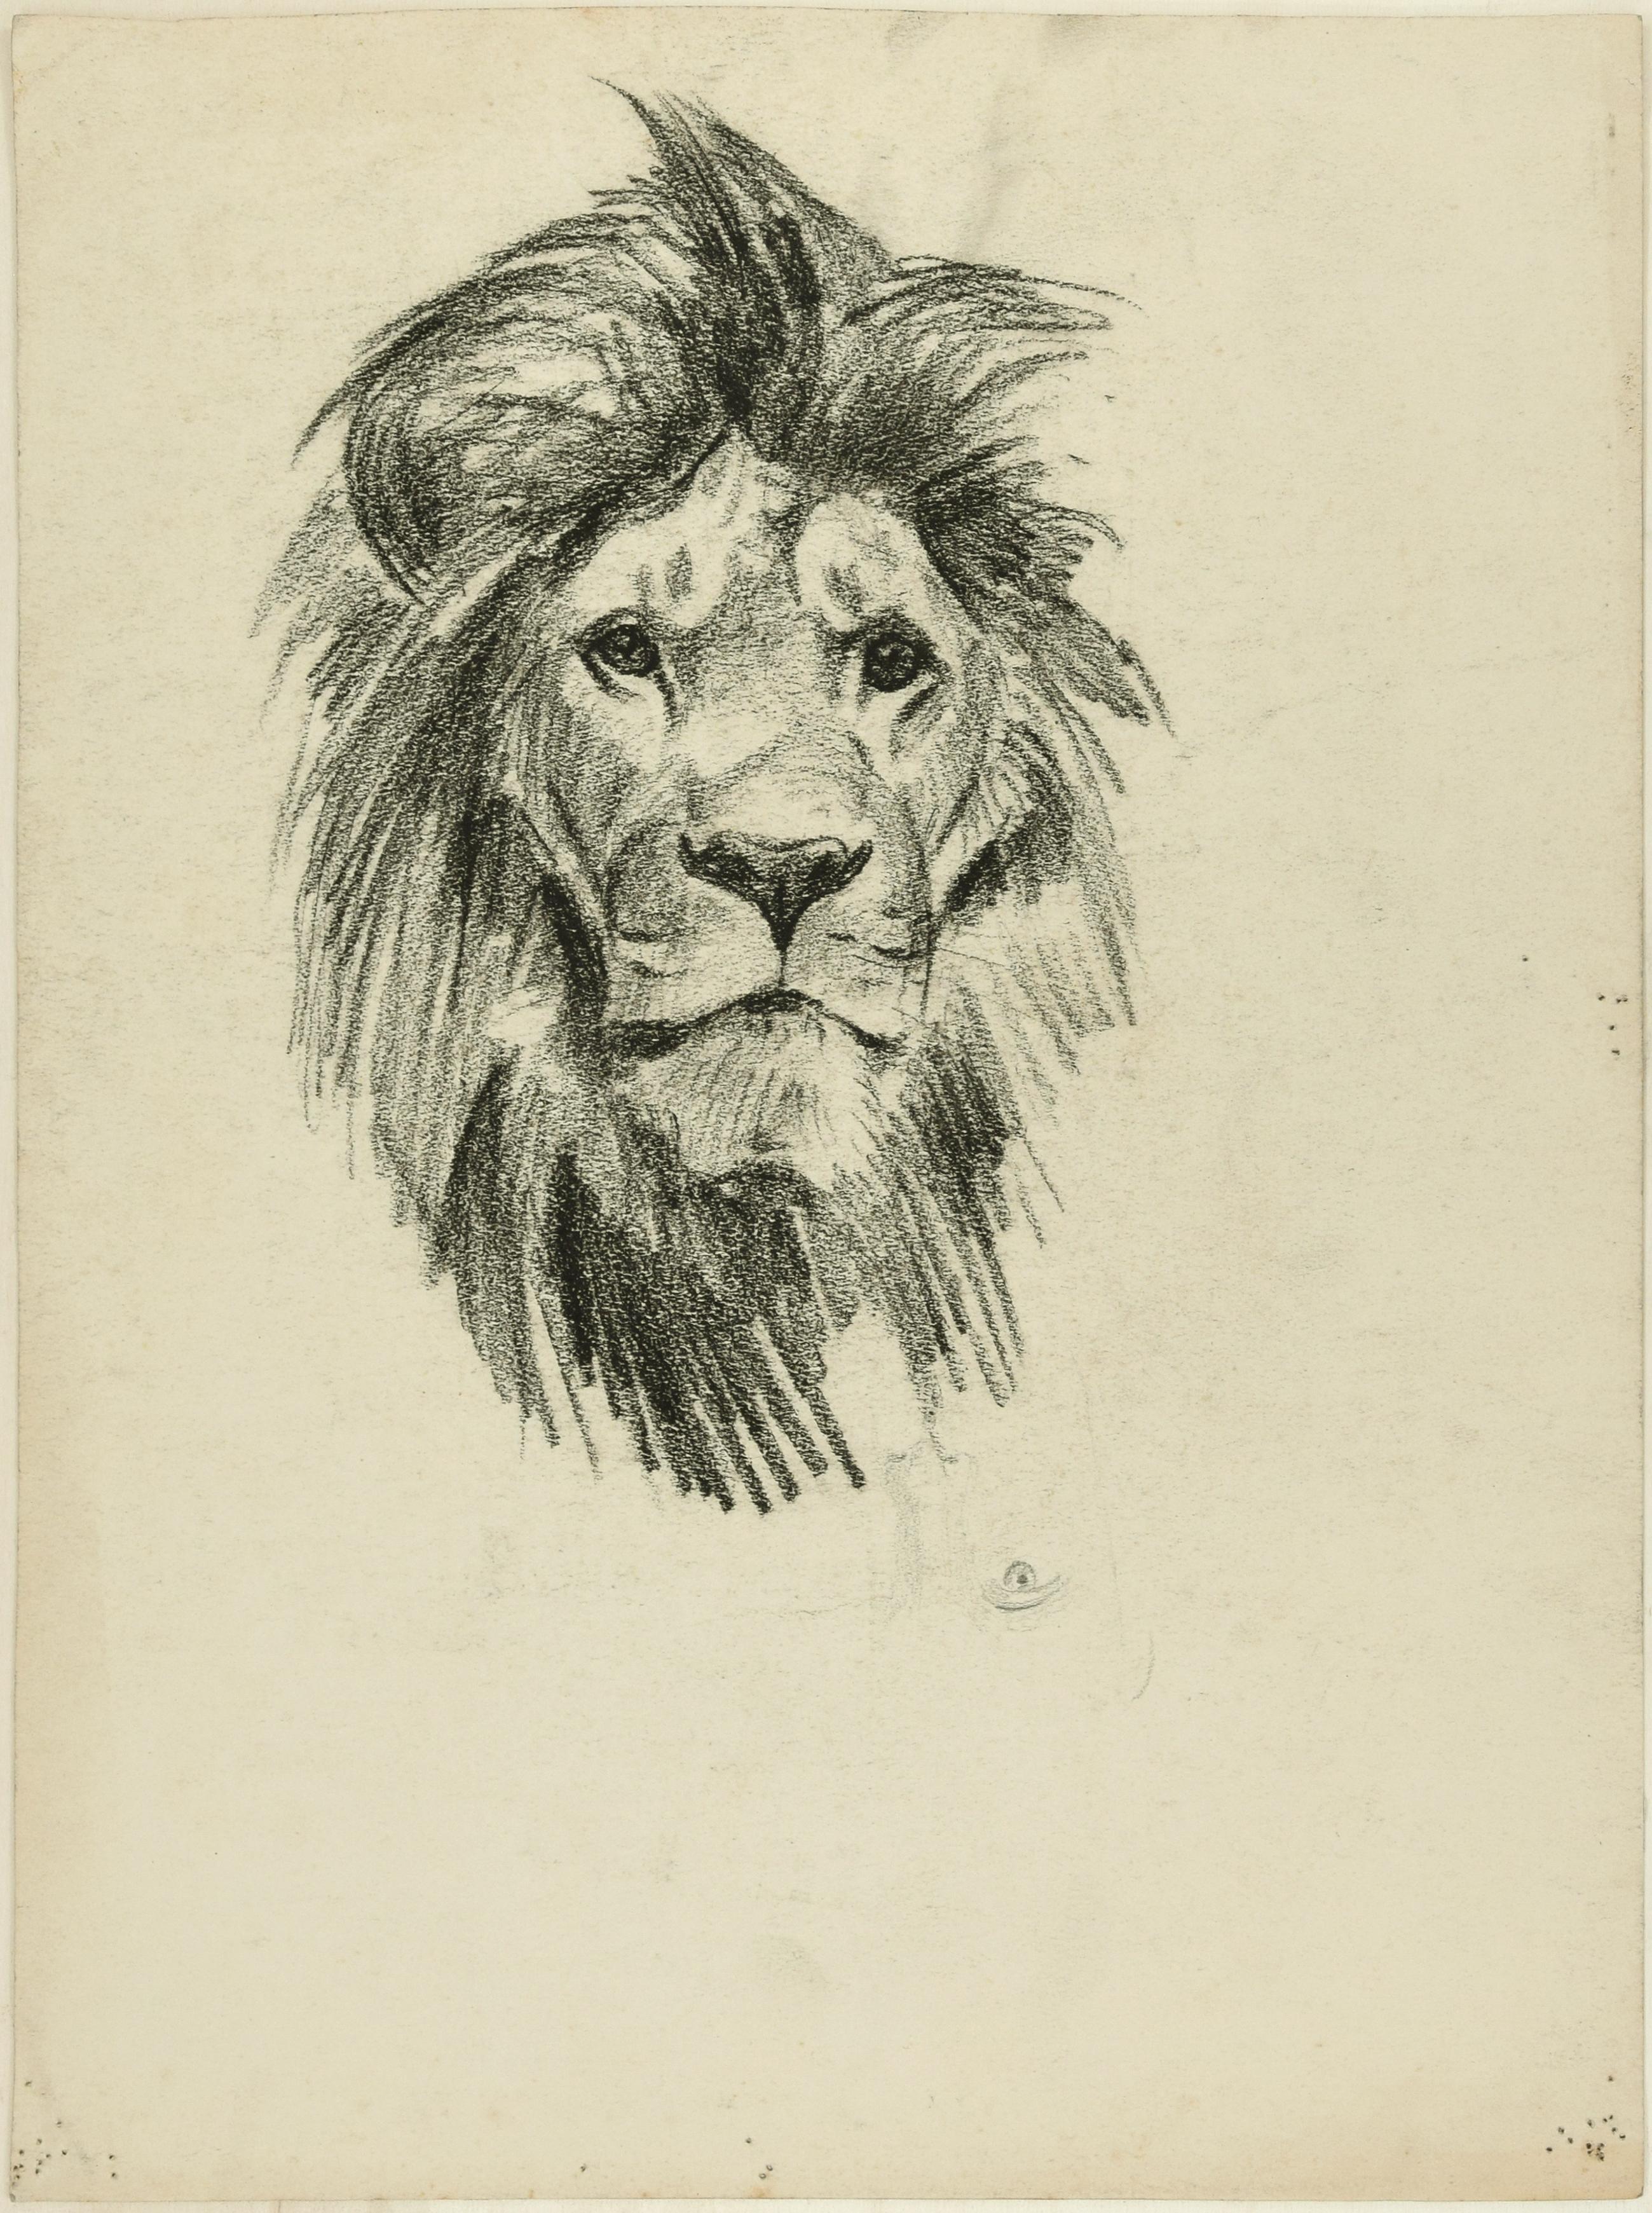 Wilhelm Lorenz Figurative Art - Head of Lion and Tiger - Original Pencil Drawing by Willy Lorenz - 1950s